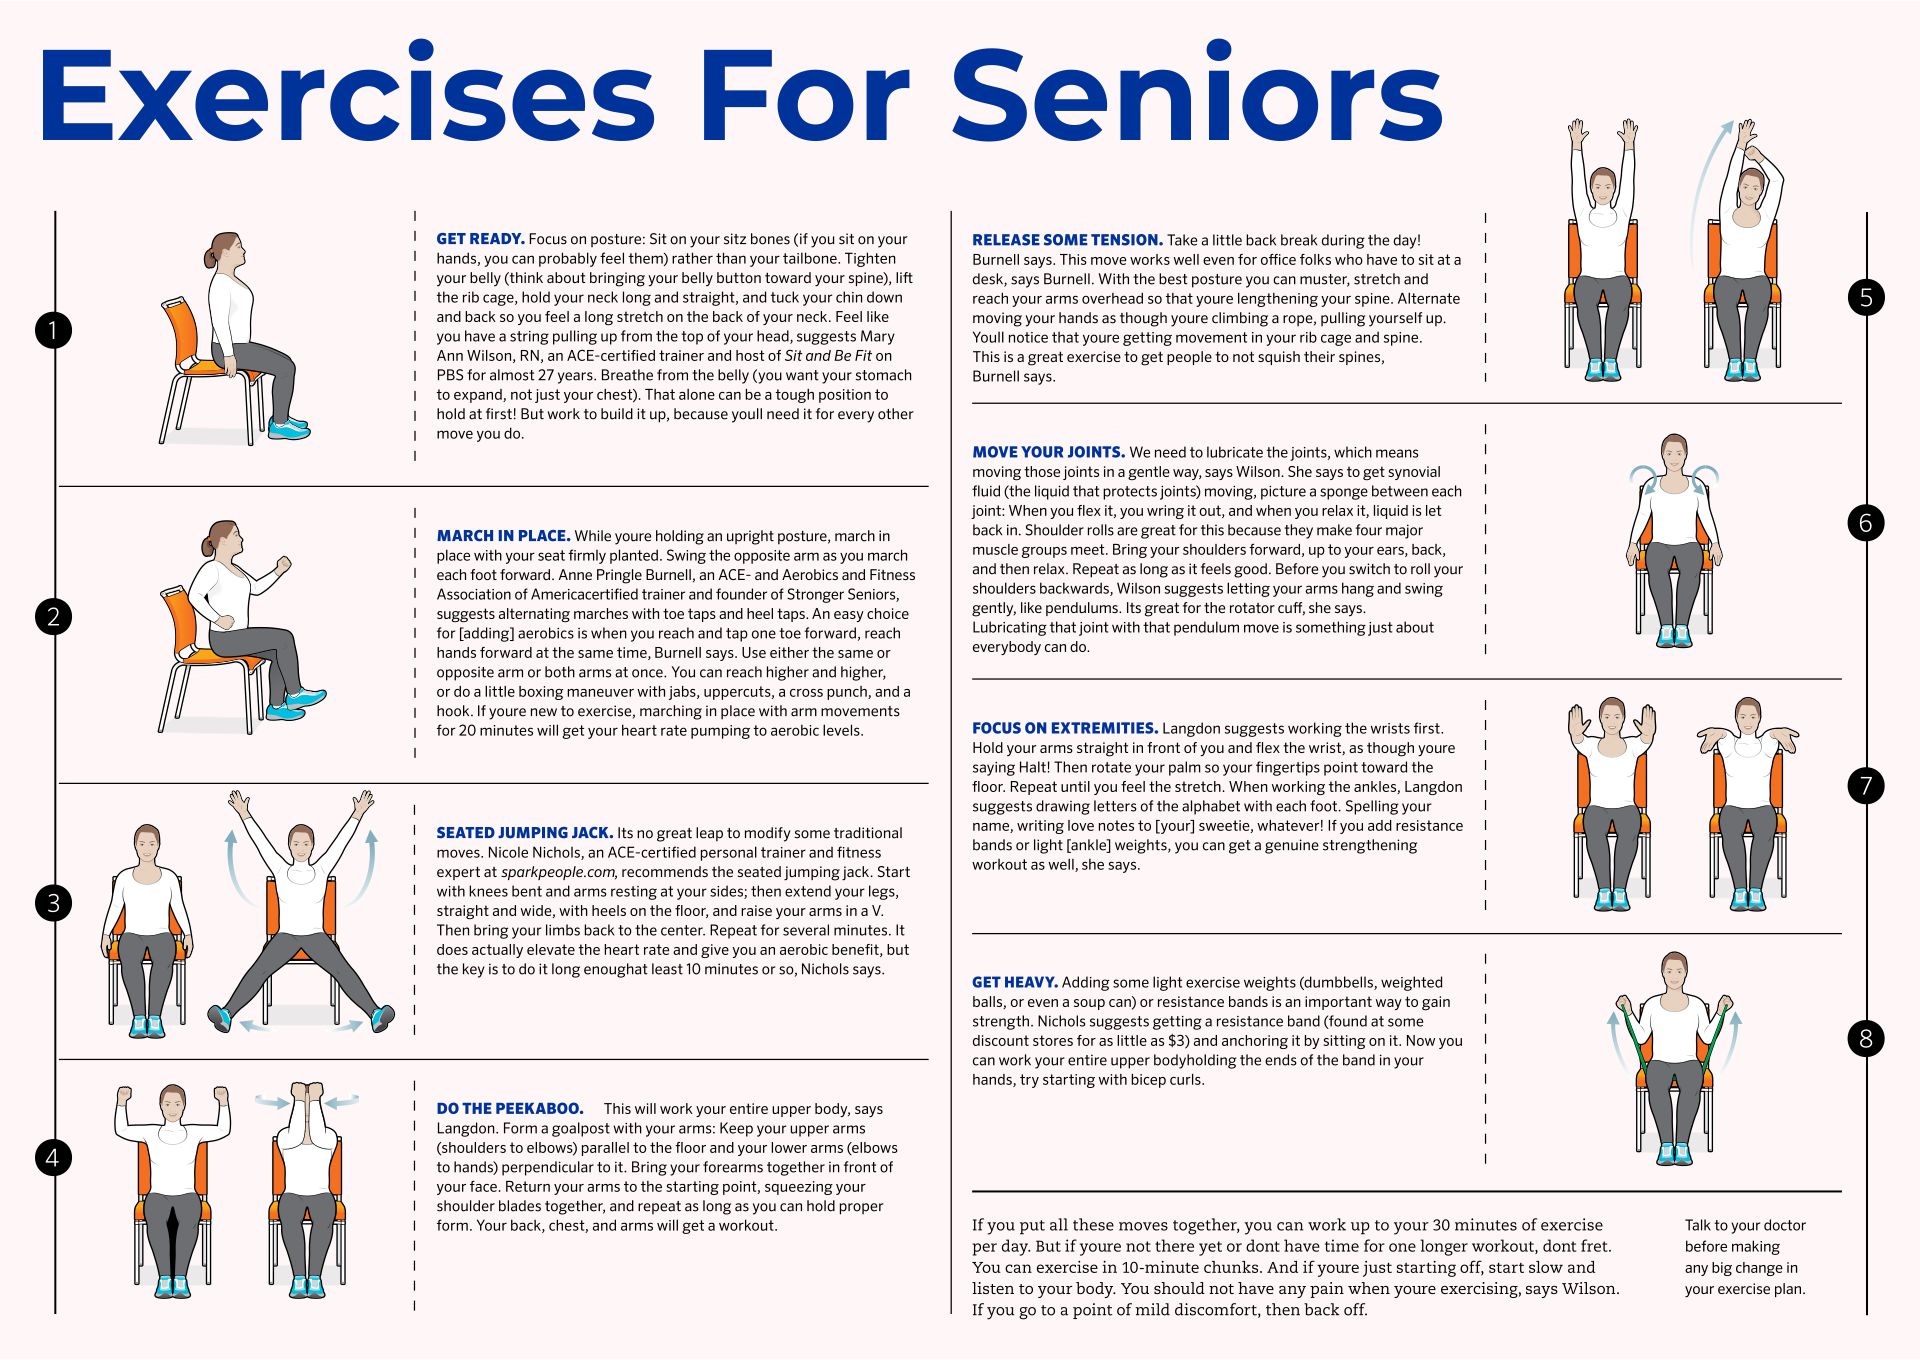 9 Best Images of Printable Chair Exercises For Seniors - Senior Chair ...